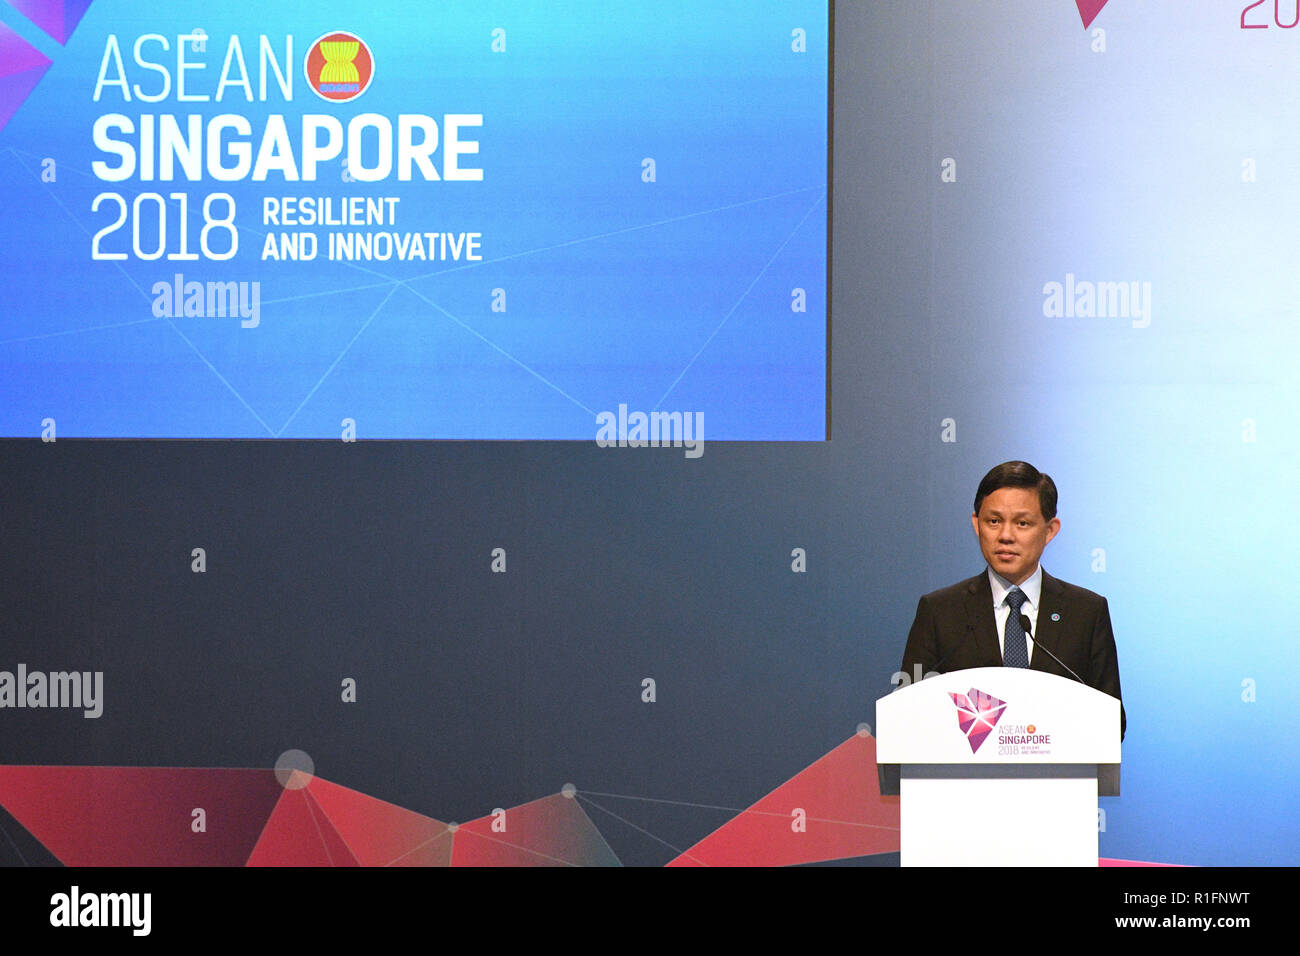 Singapore, Singapore. 12th Nov, 2018. Singaporean Minister for Trade and Industry Chan Chun Sing speaks during the signing ceremony of ASEAN's agreement on e-commerce, in Singapore, on Nov. 12, 2018. Trade ministers of the Association of Southeast Asian Nations (ASEAN) member states signed an agreement on e-commerce on Monday, encouraging paperless trading between businesses and governments of the bloc to generate rapid and efficient transactions. Credit: Then Chih Wey/Xinhua/Alamy Live News Stock Photo